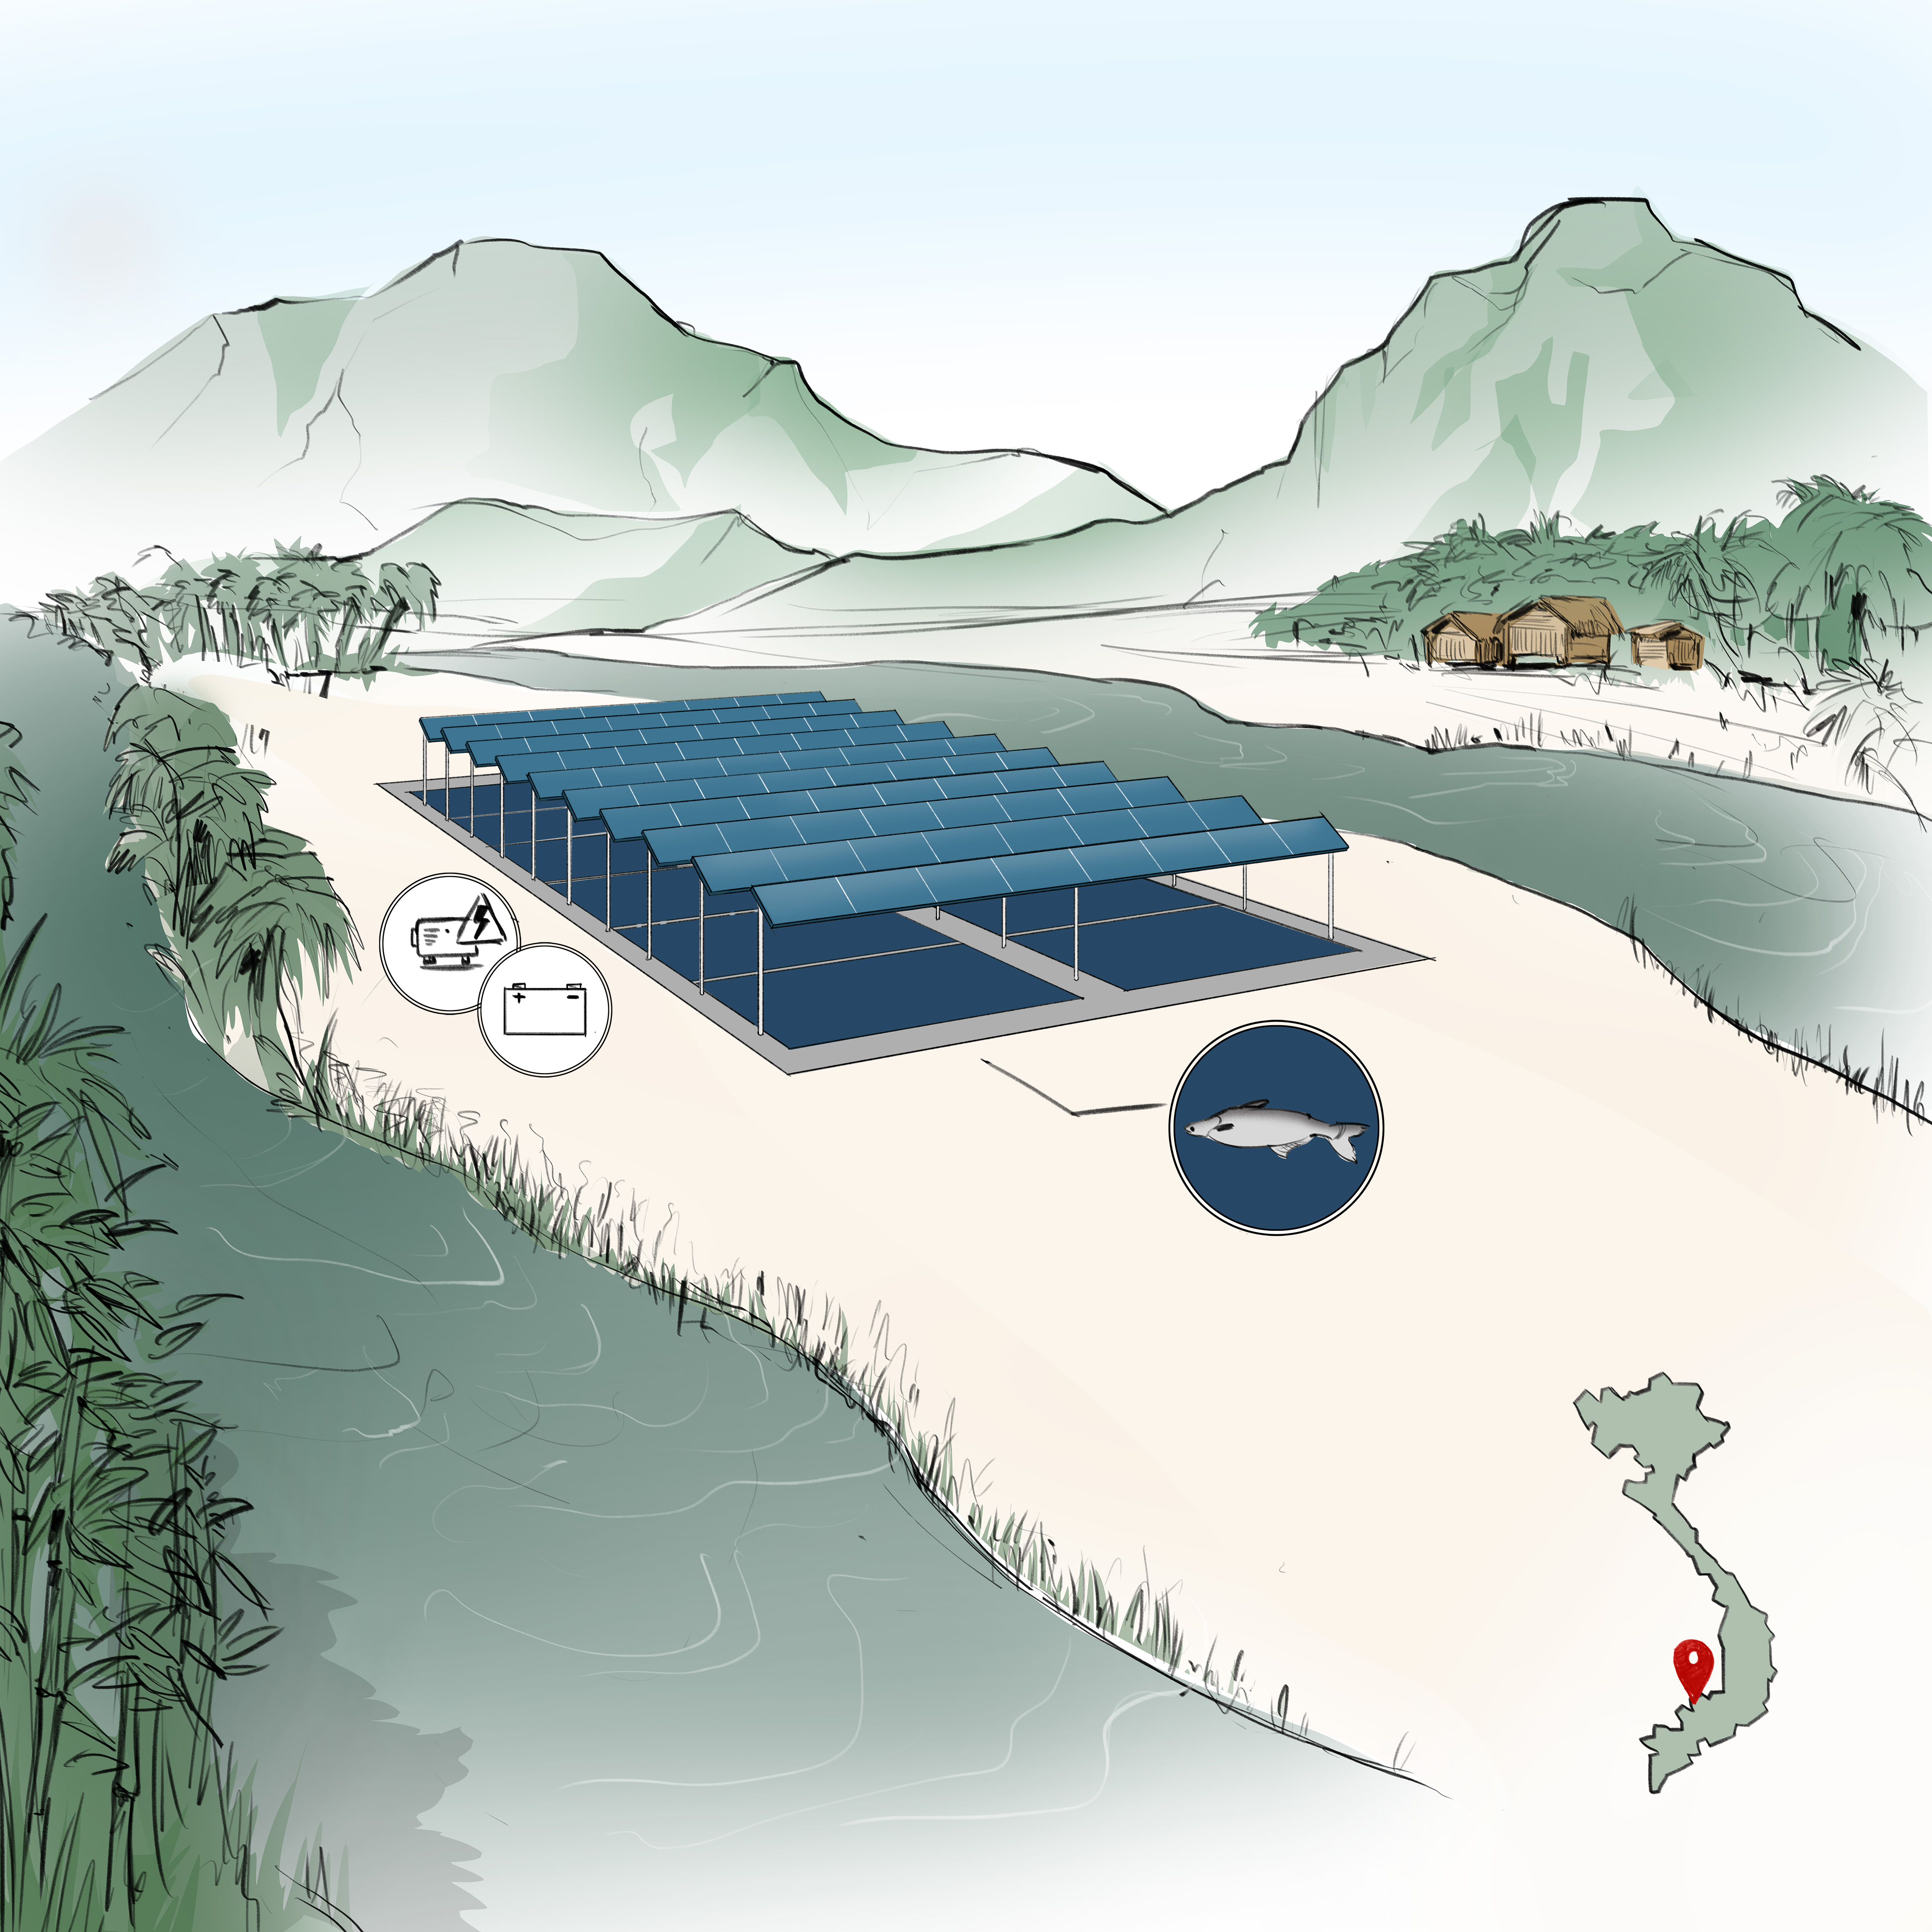 Planned pangasius photovoltaic plant for a self-sufficient electricity supply in An Giang. 